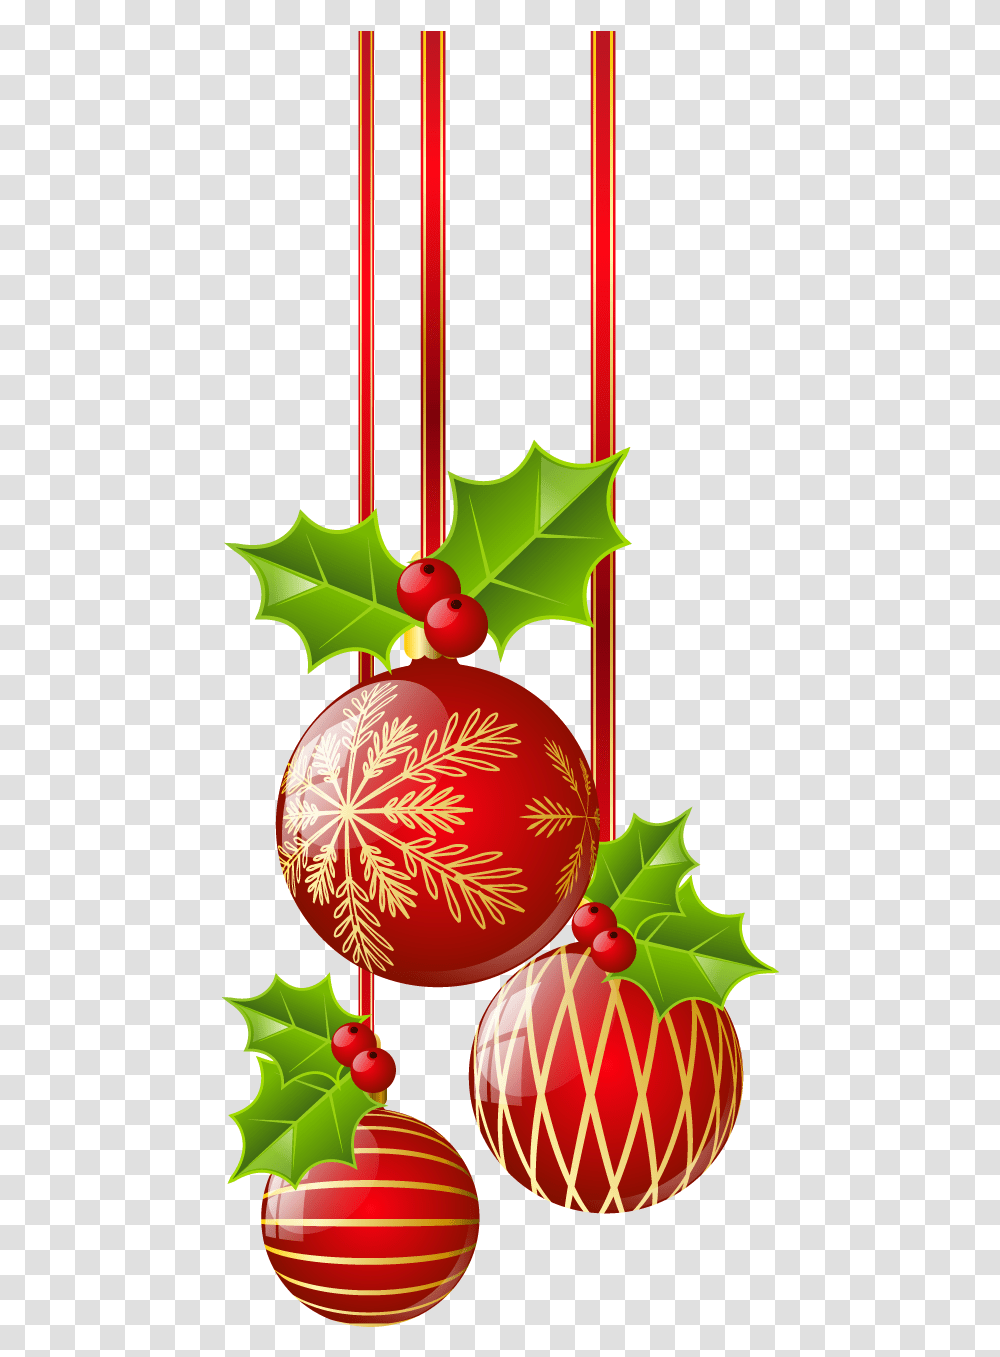 Ornaments Christmas Border Red Christmas Red Ornaments Background Christmas Ornament Clipart, Plant, Food, Tree, Fruit Transparent Png